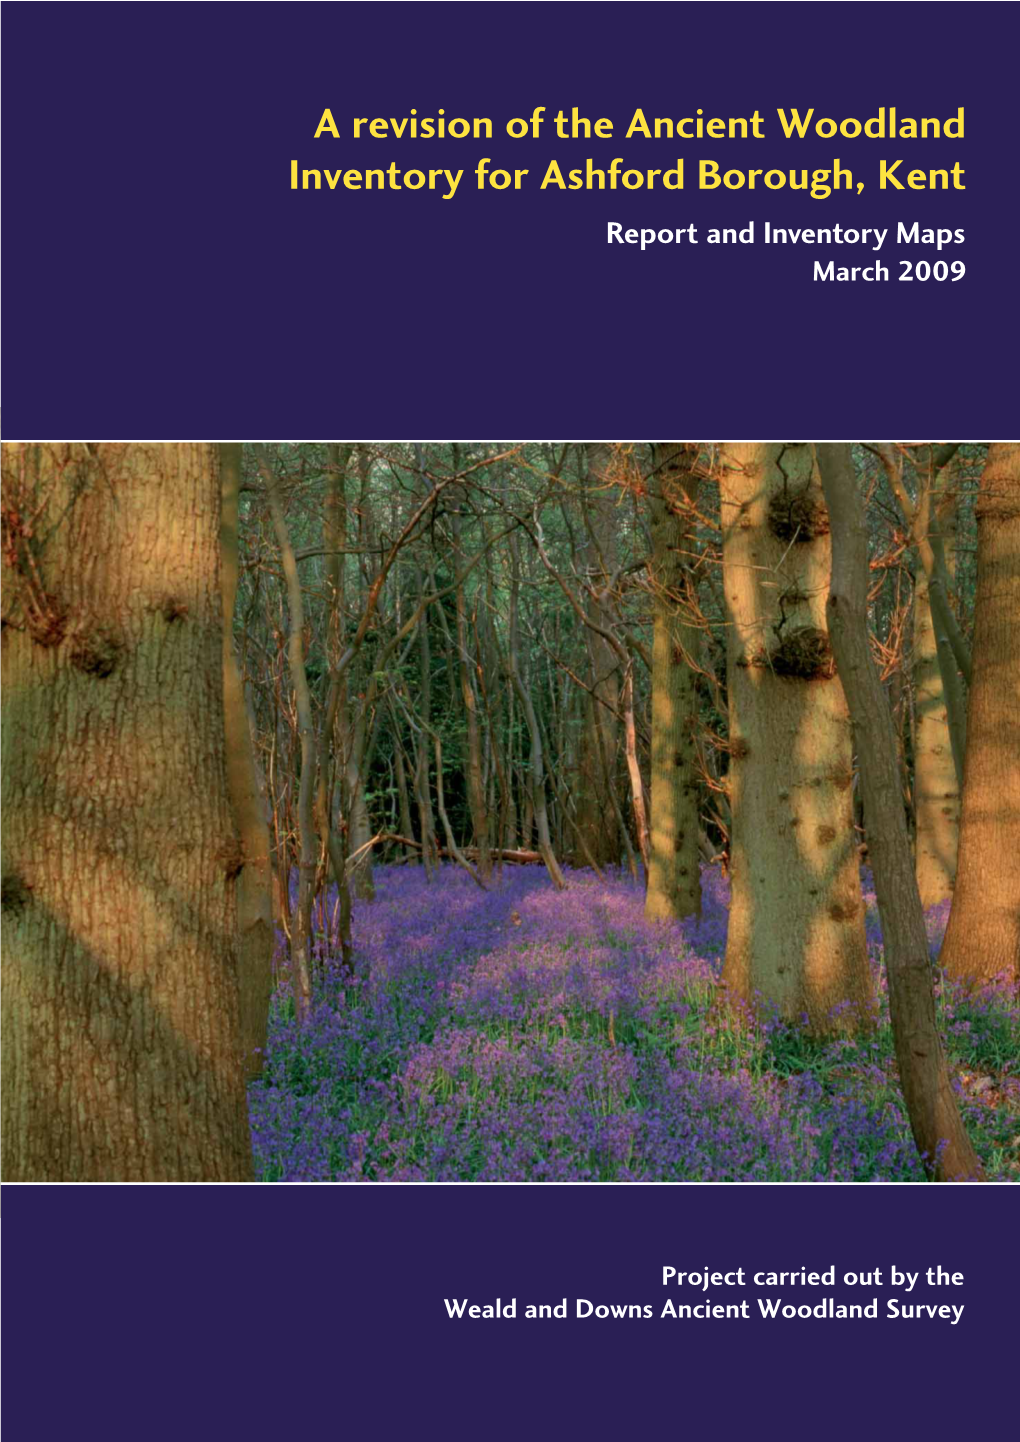 A Revision of the Ancient Woodland Inventory for Ashford Borough, Kent Report and Inventory Maps March 2009